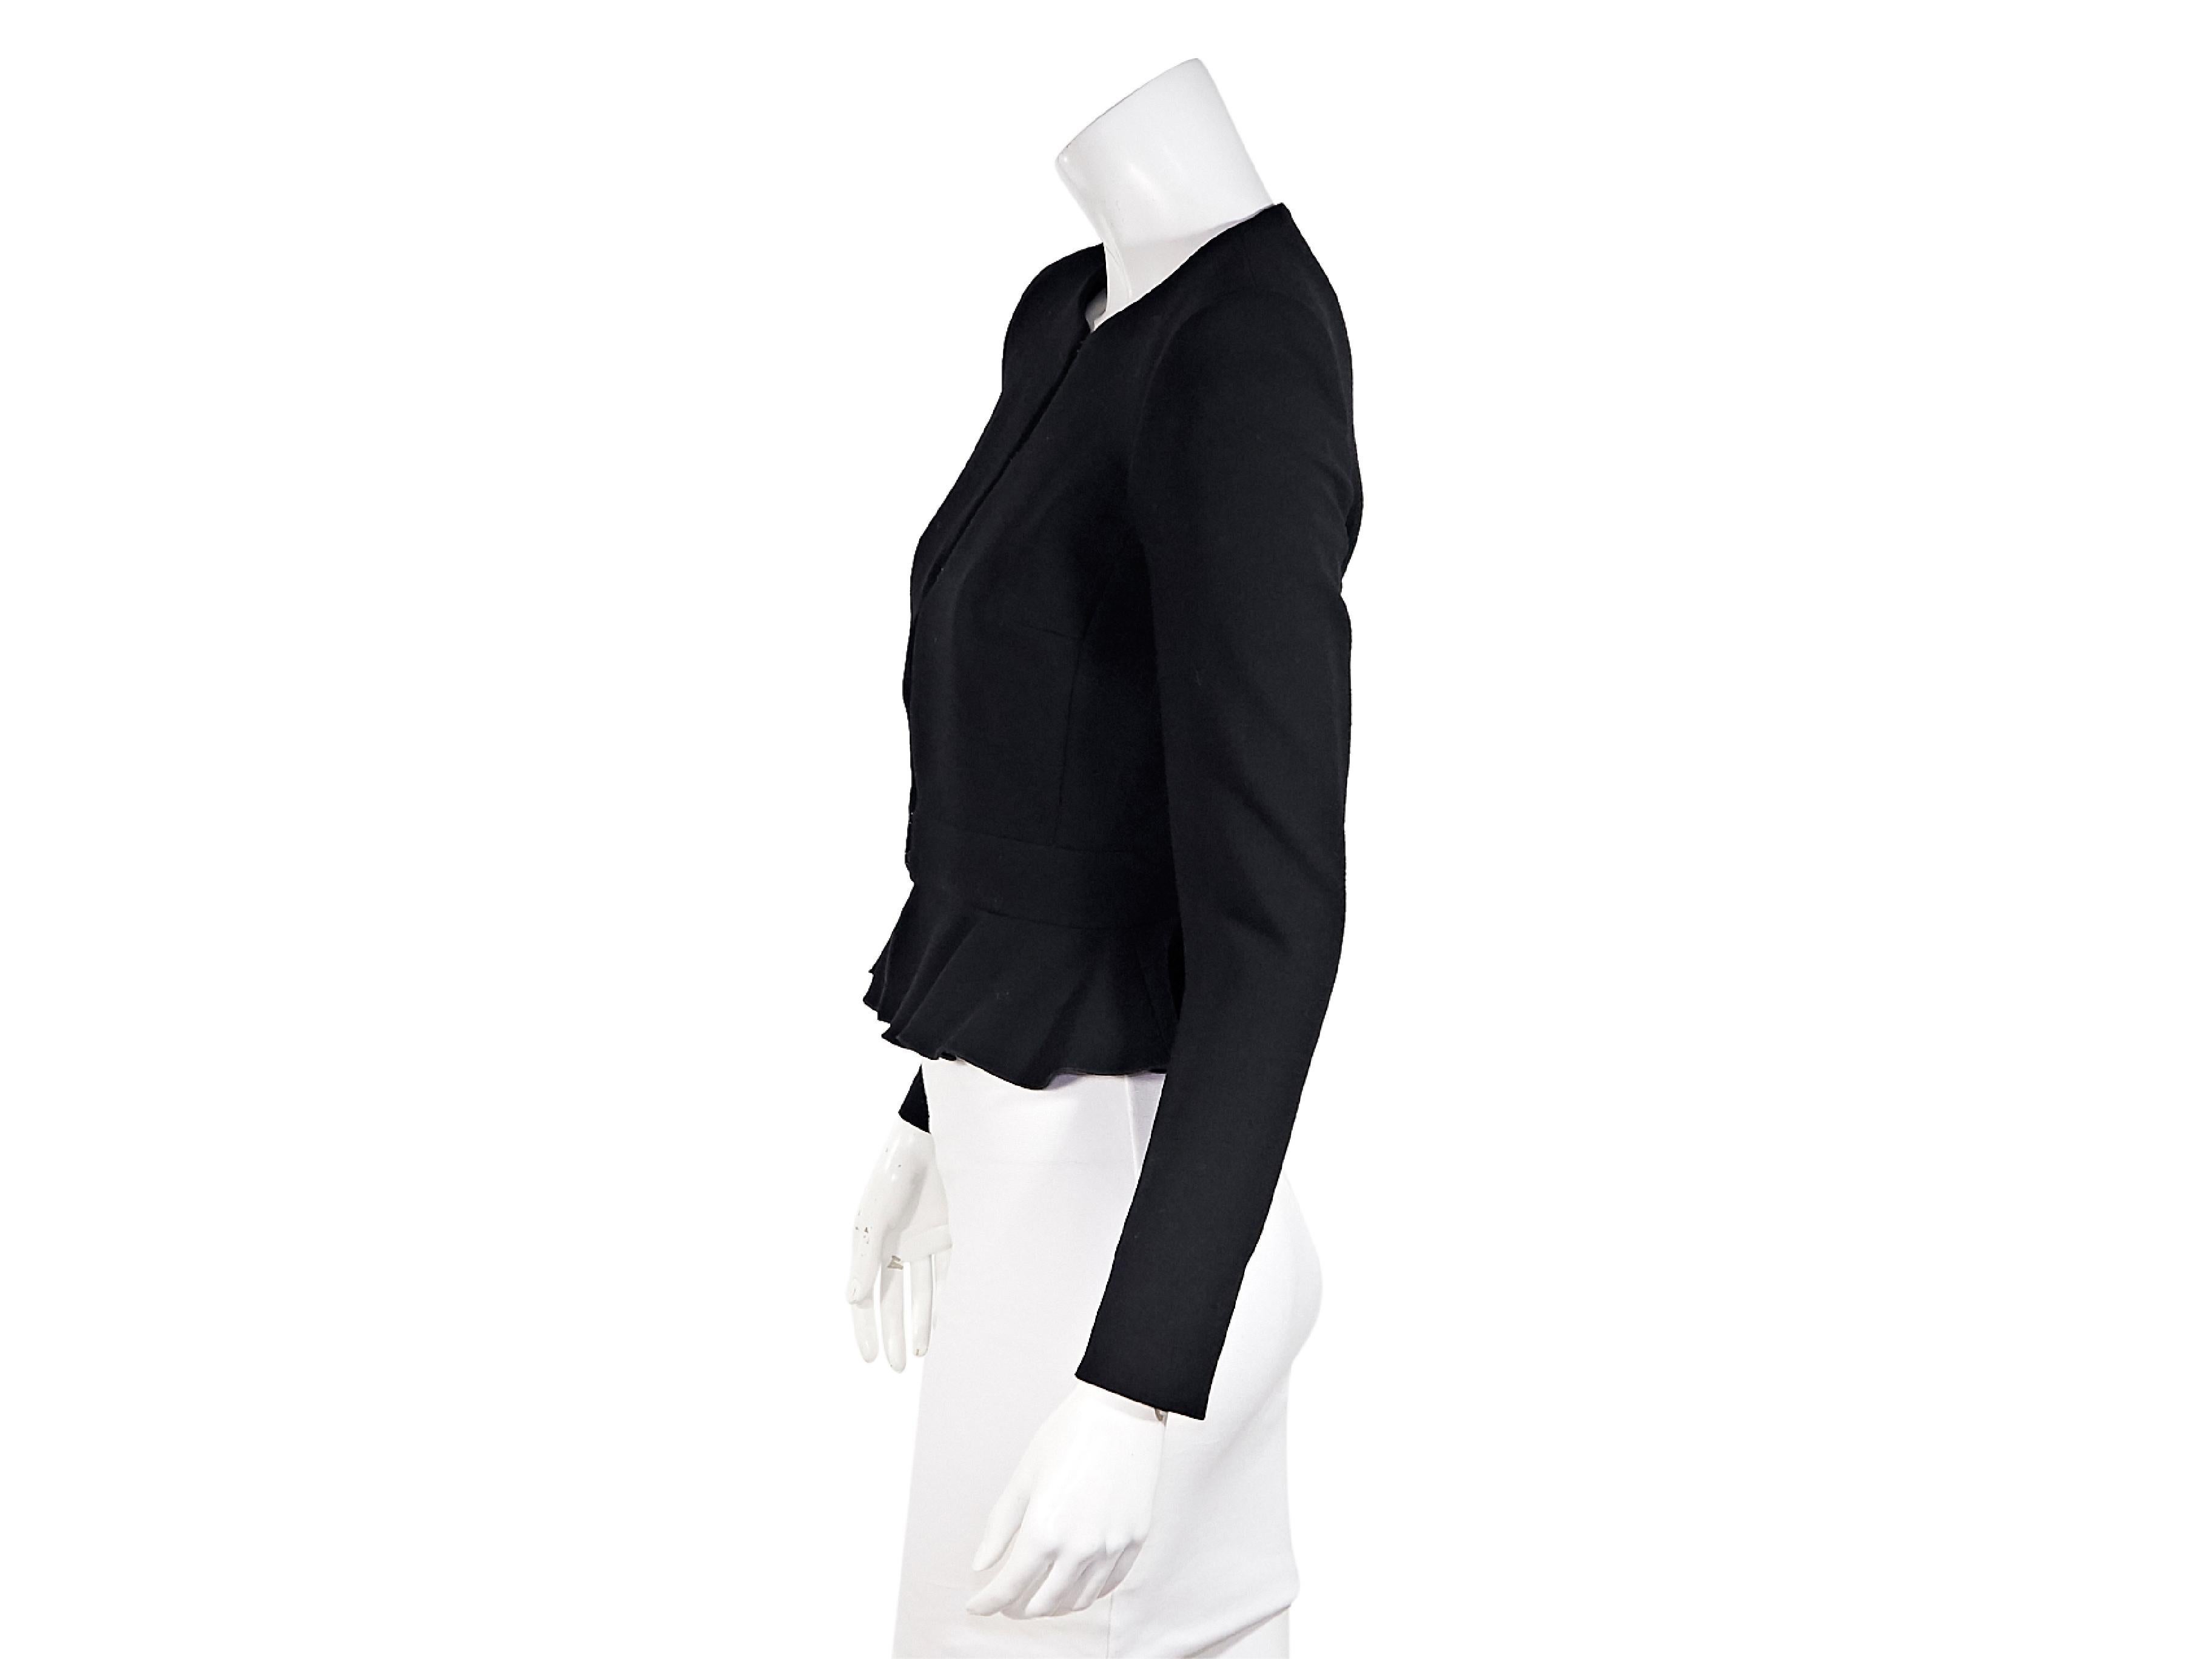 Product details:  Black silk moto jacket by Alexander McQueen.  From the FW 2003 collection.  Stand collar.  Long sleeves.  Zip-front closure.  Ruffle panels.  34